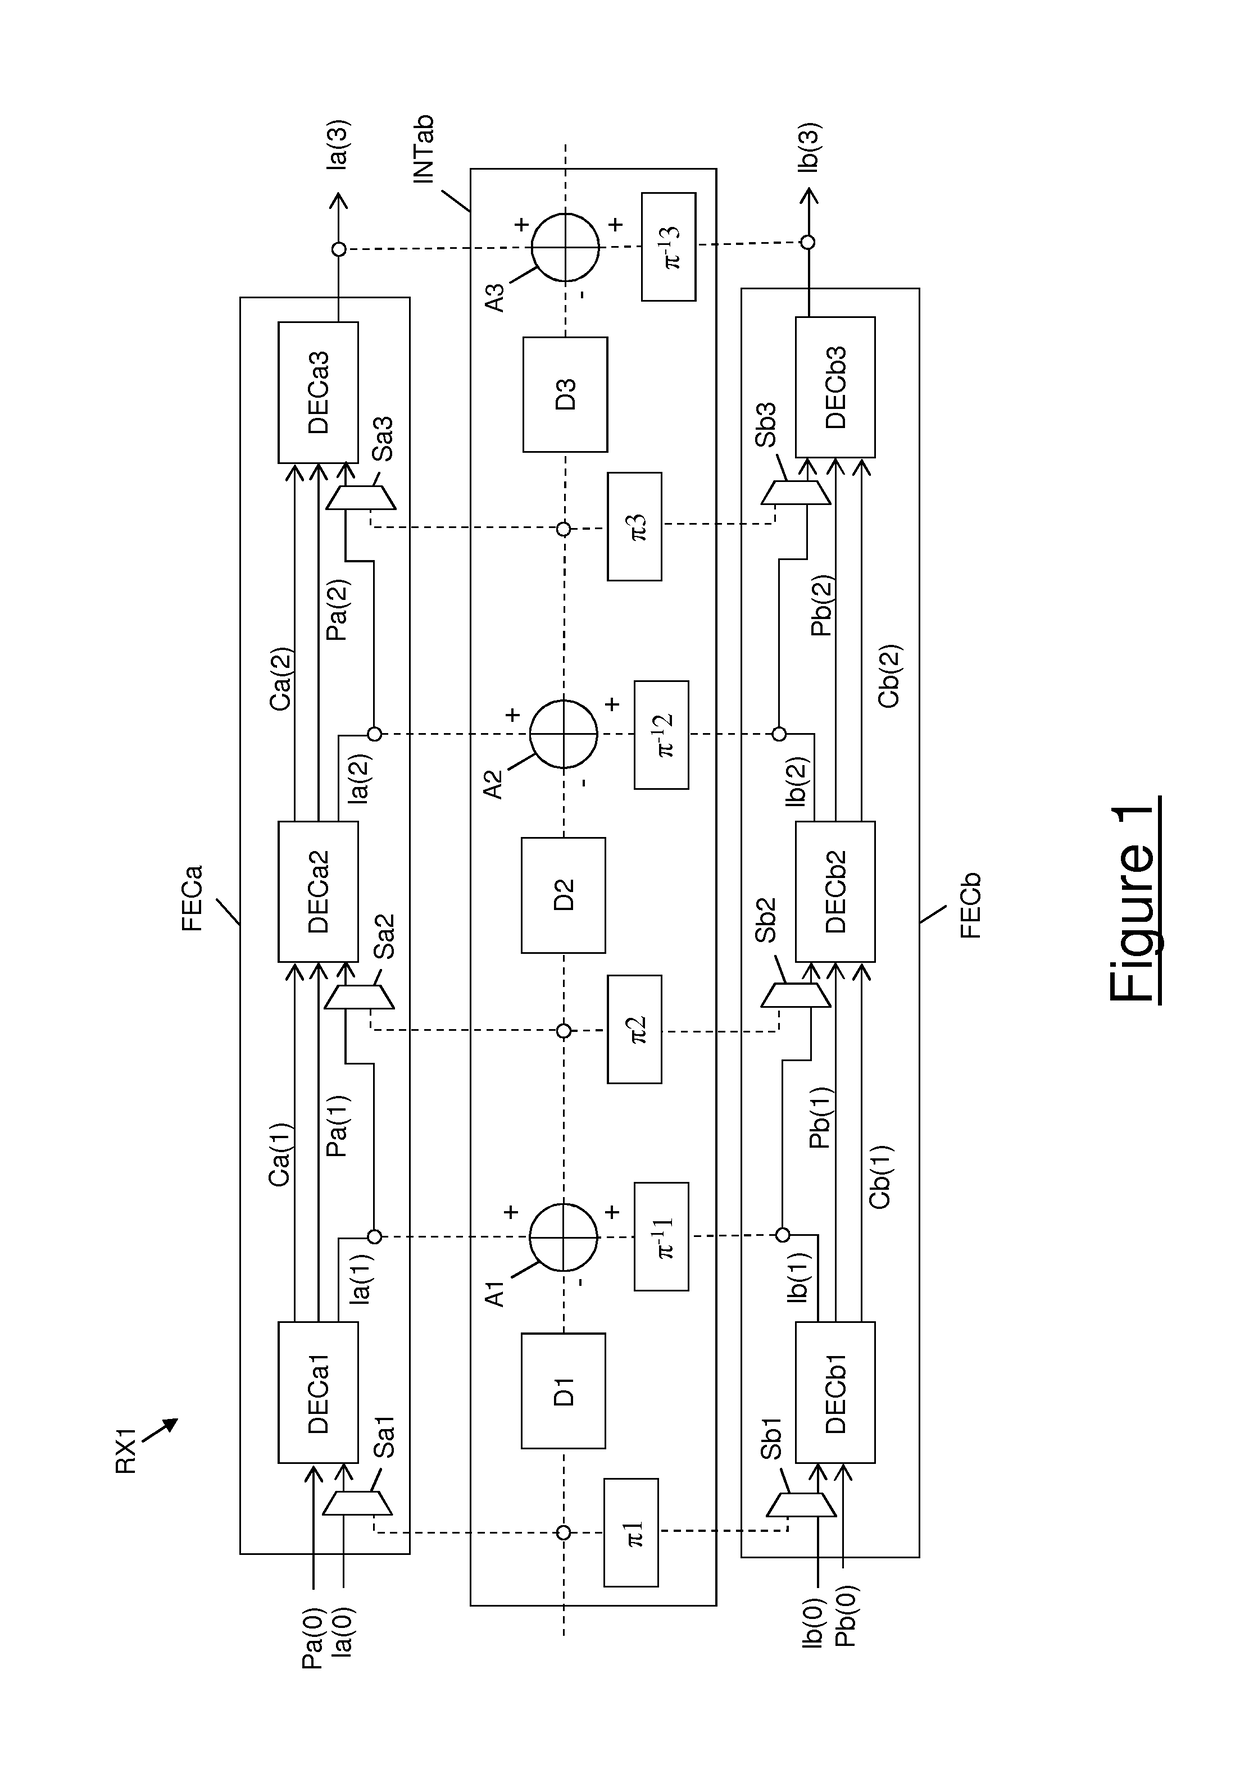 Optical coherent receiver with forward error correction